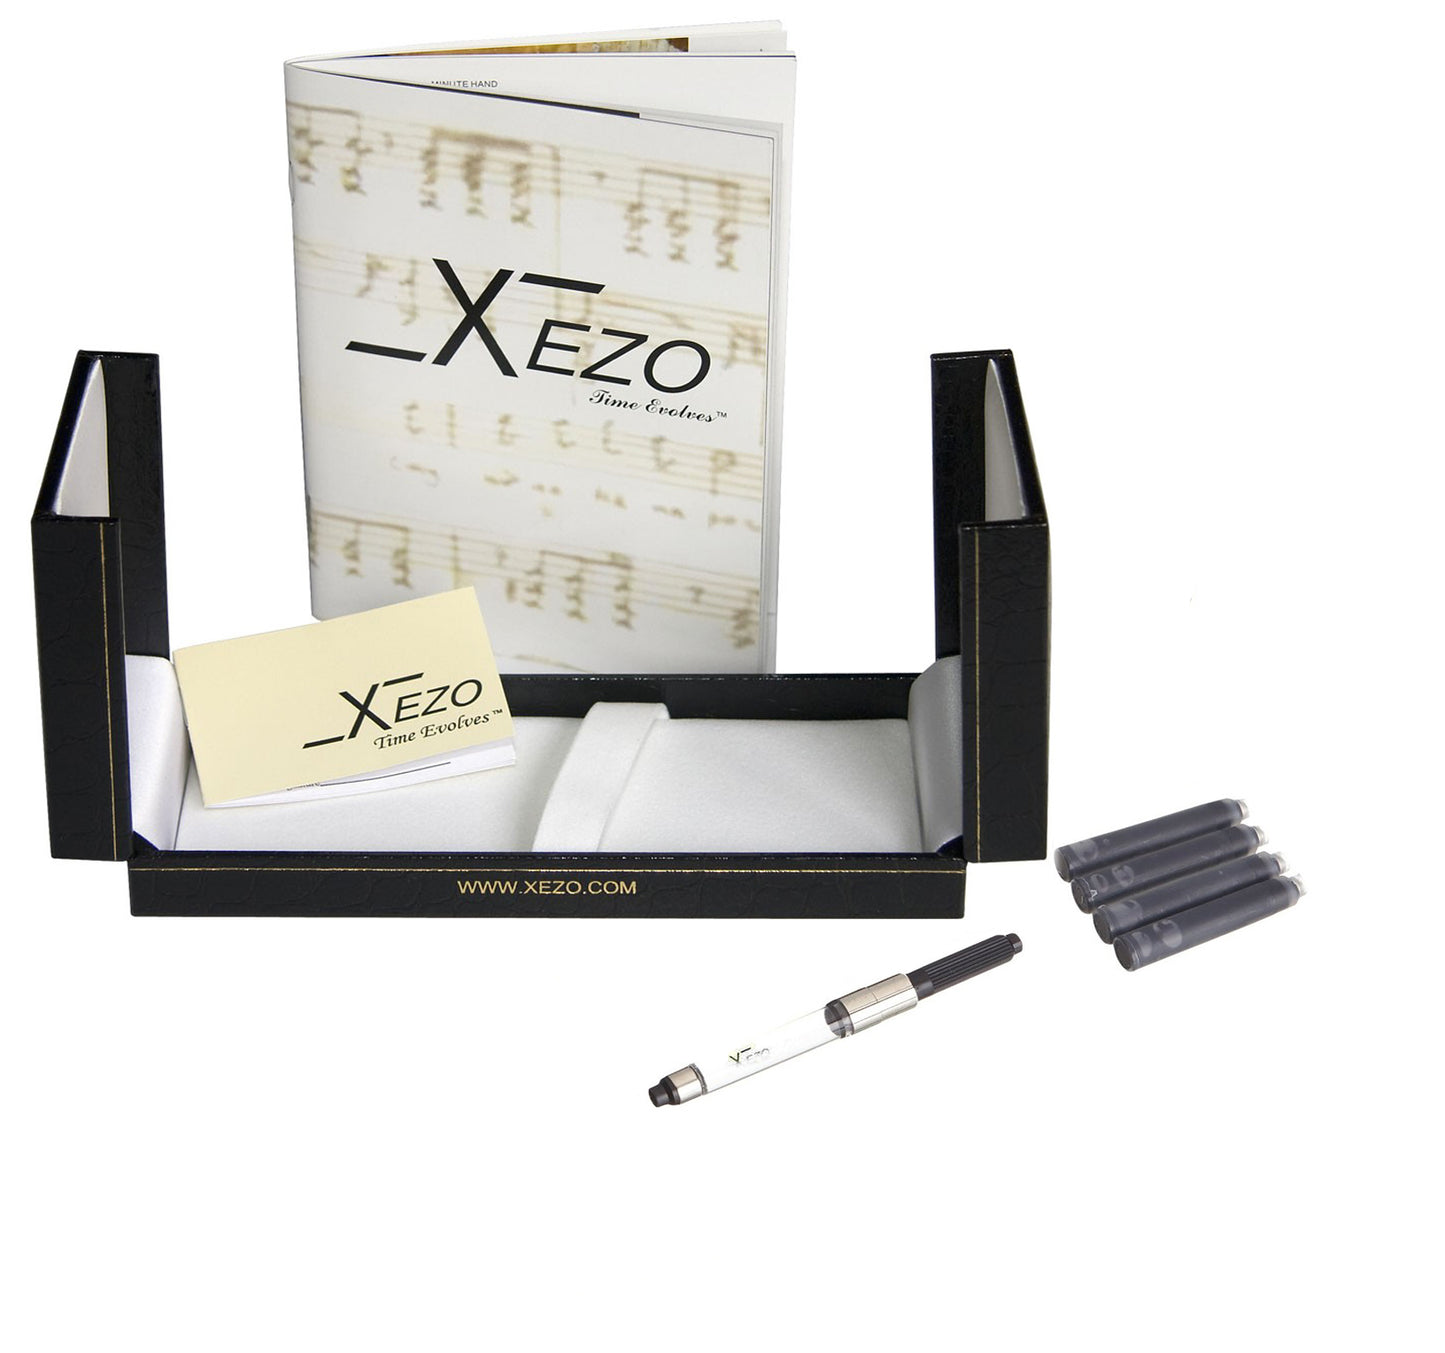 Xezo - Black gift box, certificate, manual, chrome-plated ink converter, and four ink cartridges of the Incognito Sunstone FM fountain pen